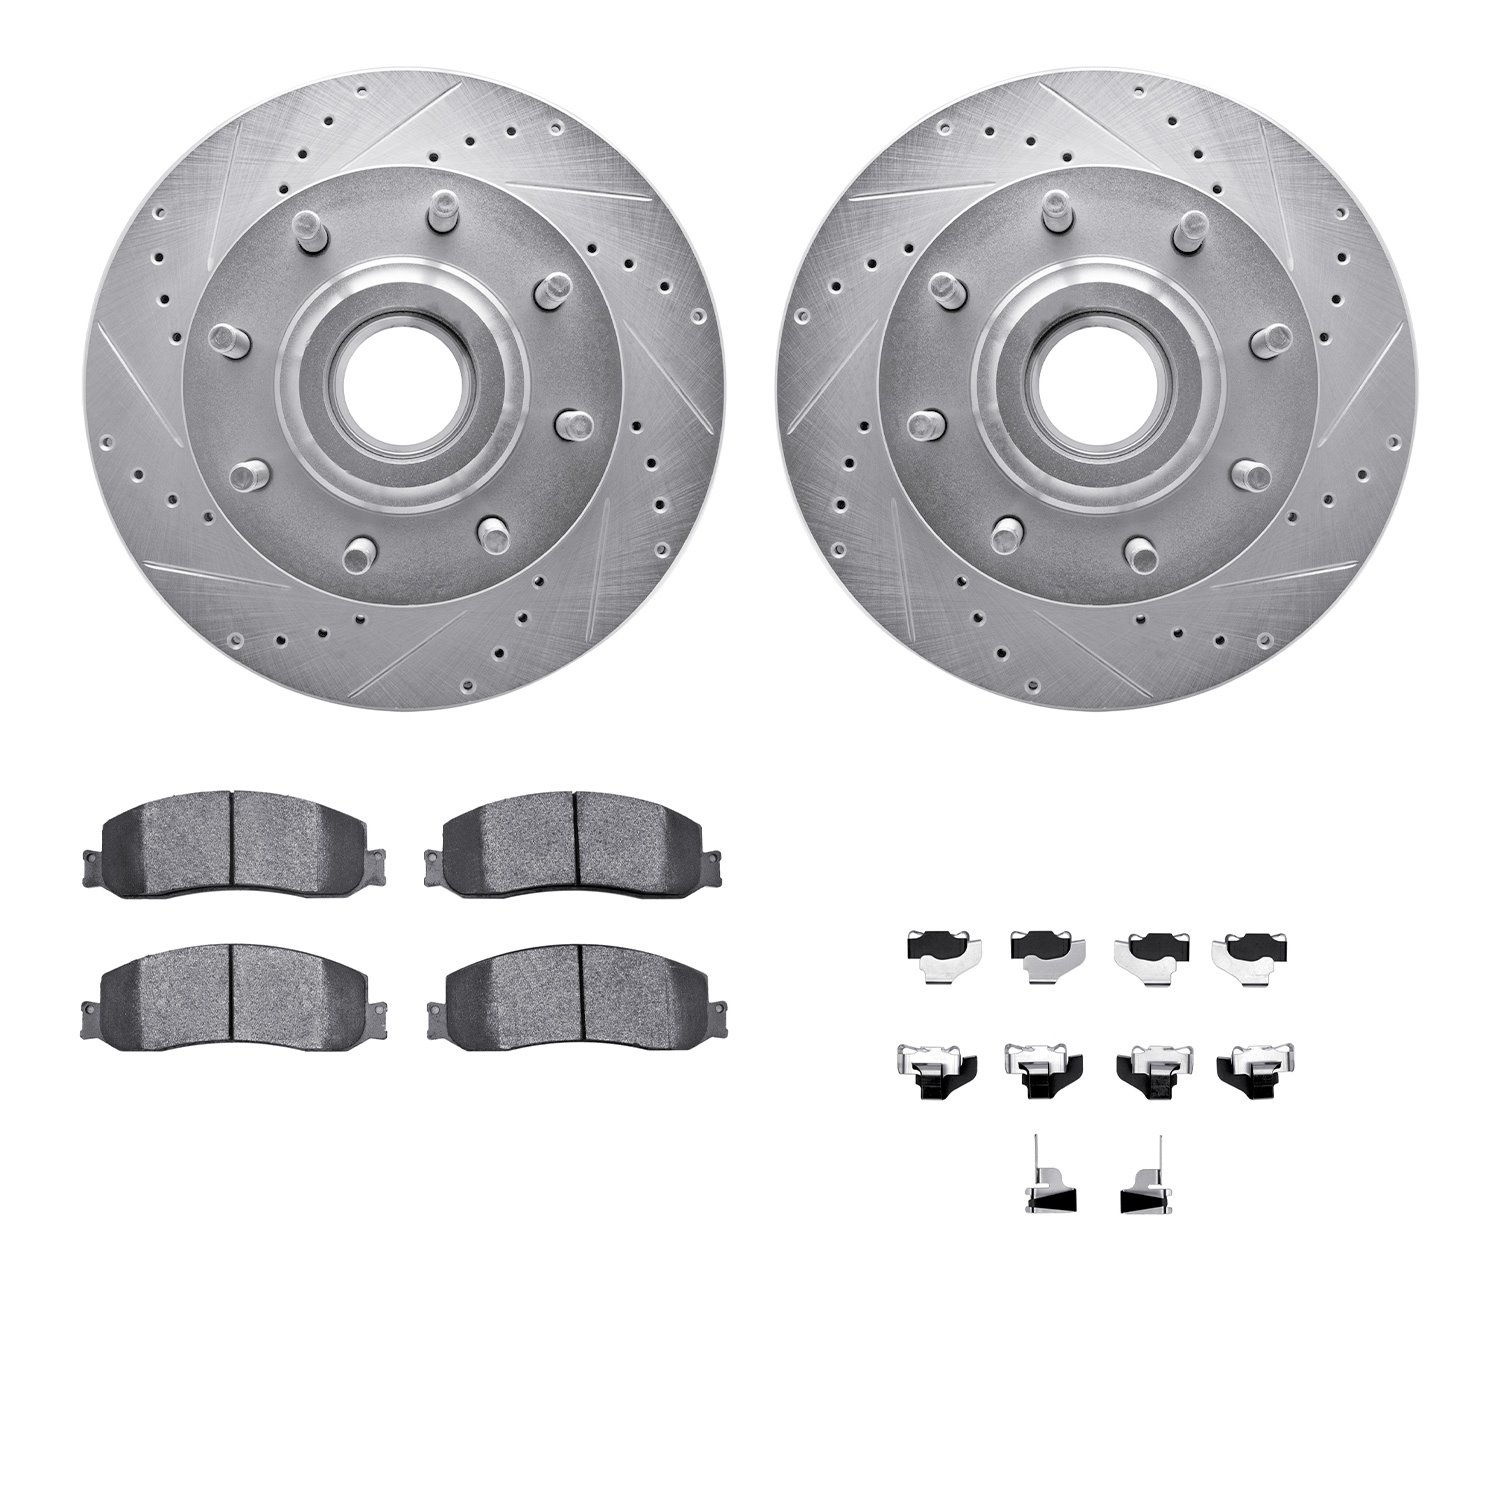 7412-54092 Drilled/Slotted Brake Rotors with Ultimate-Duty Brake Pads Kit & Hardware [Silver], 2012-2012 Ford/Lincoln/Mercury/Ma